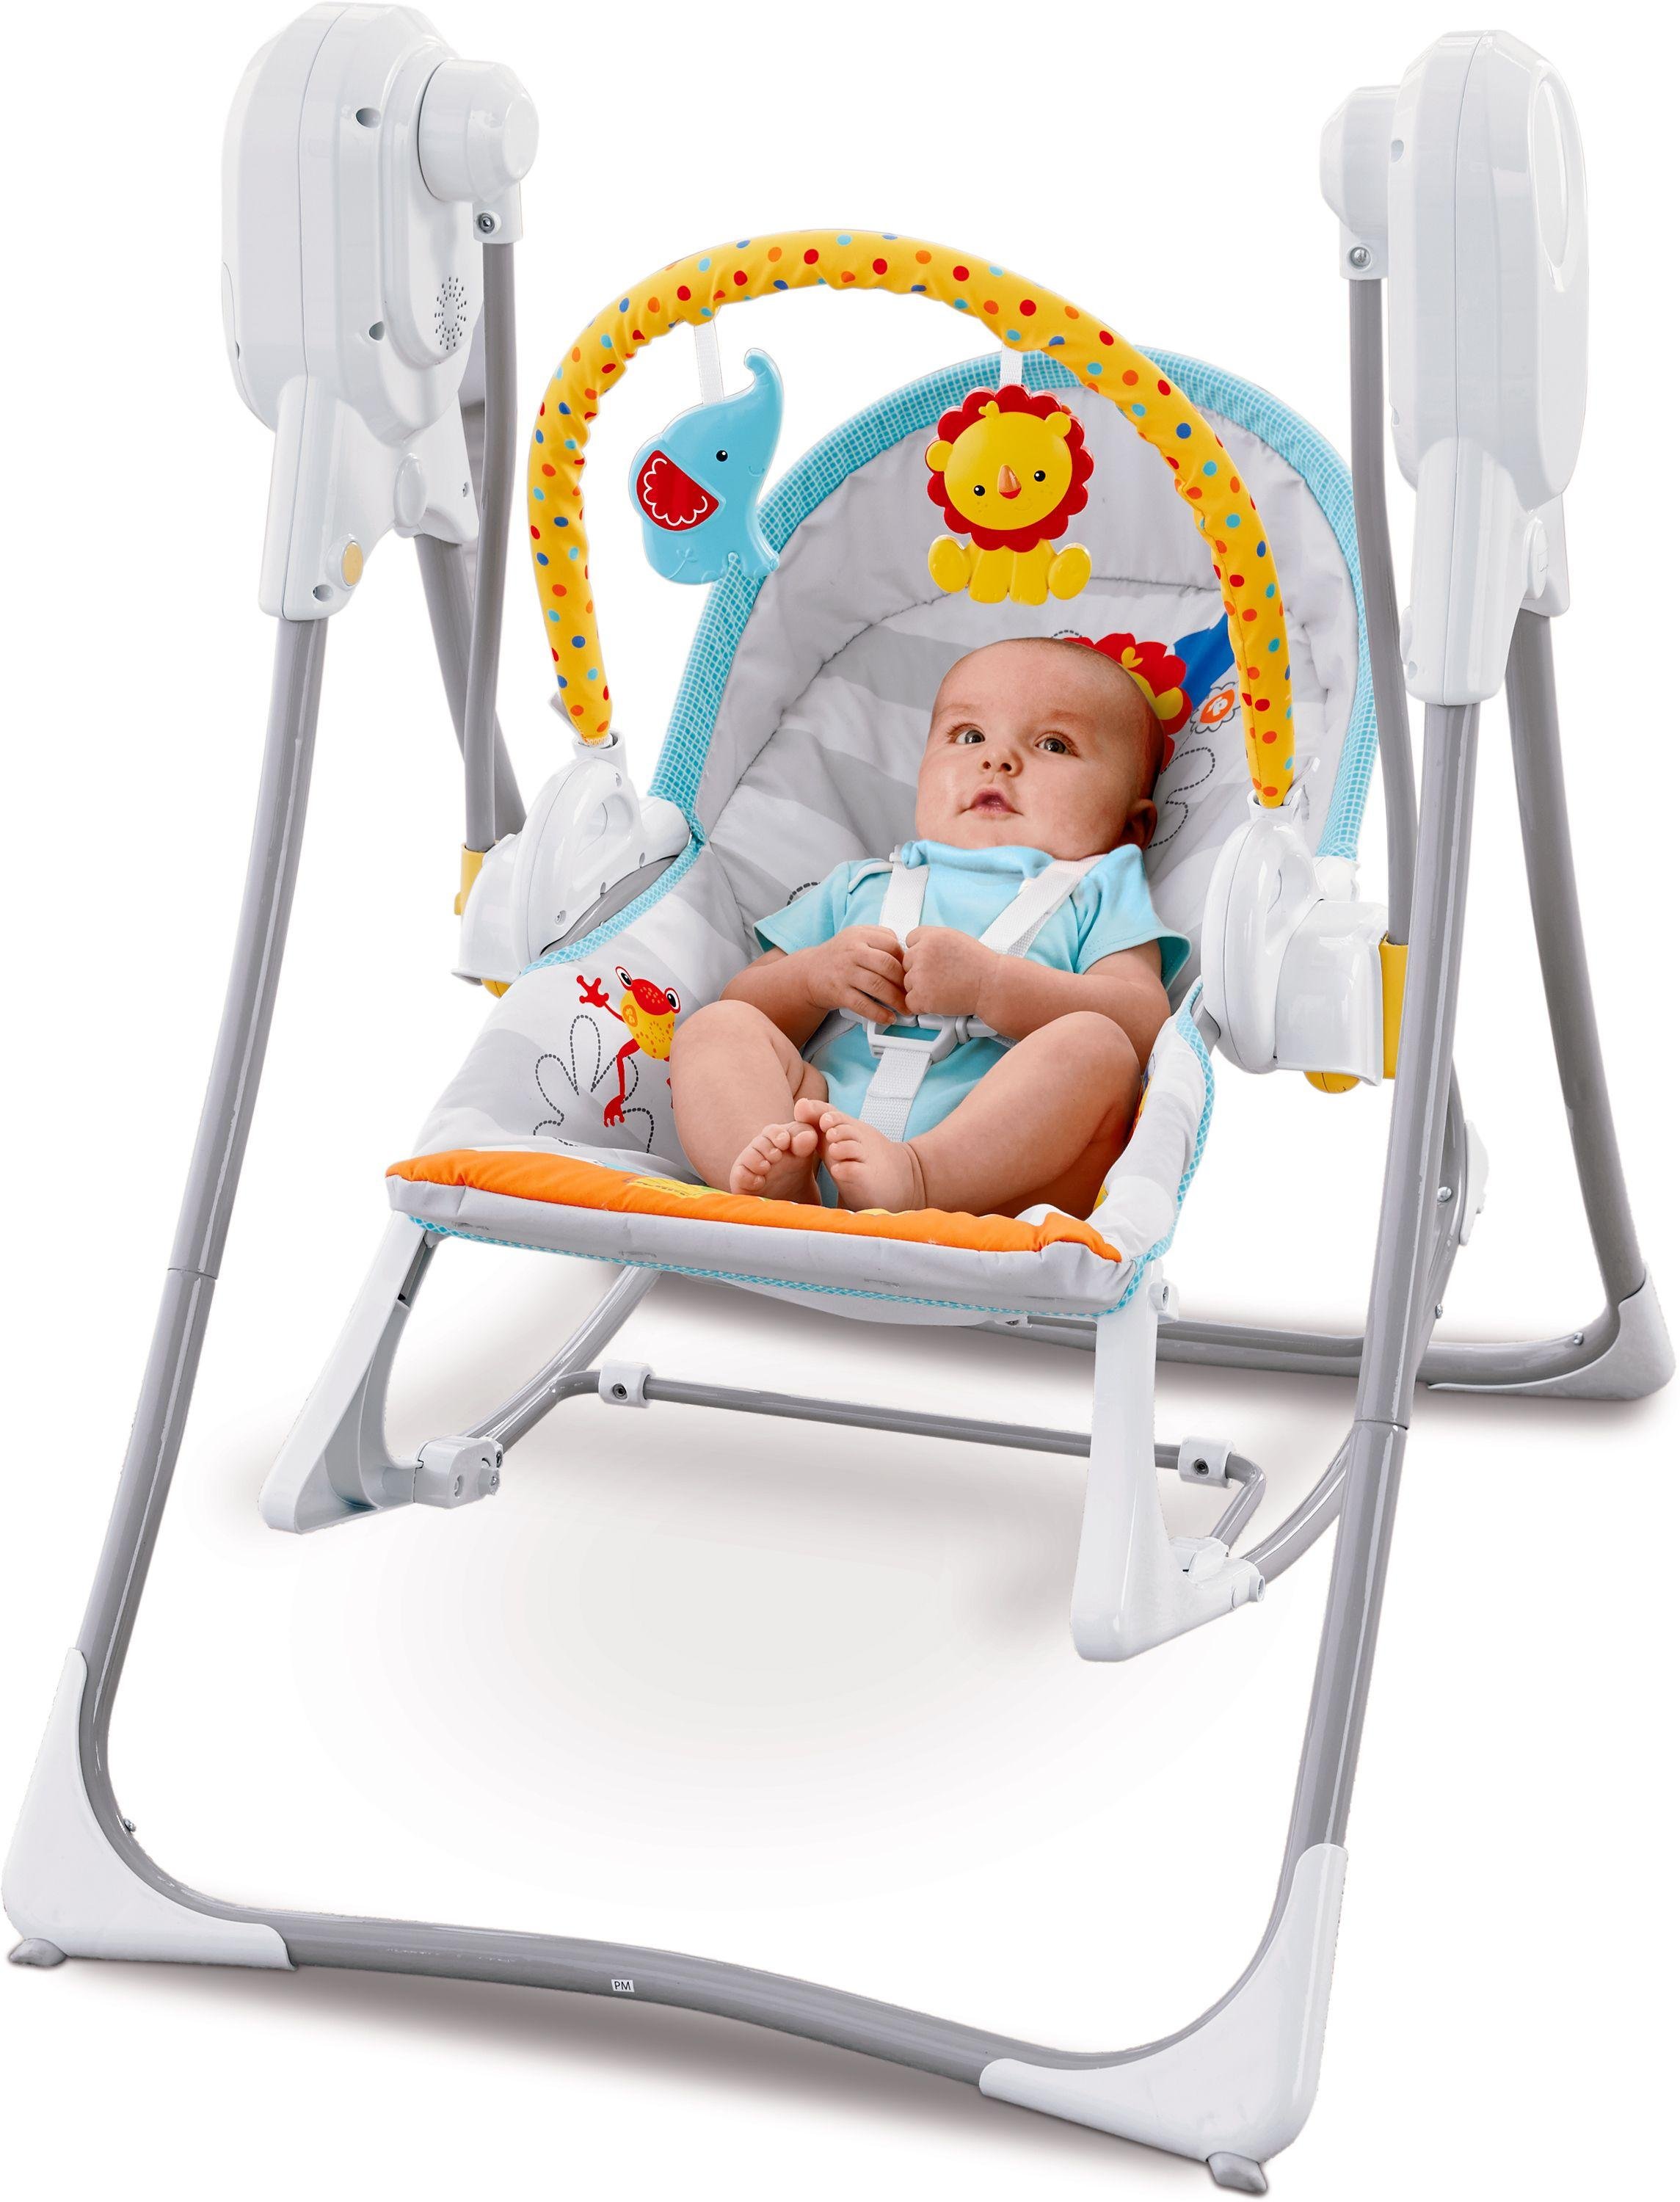 baby swing chair price